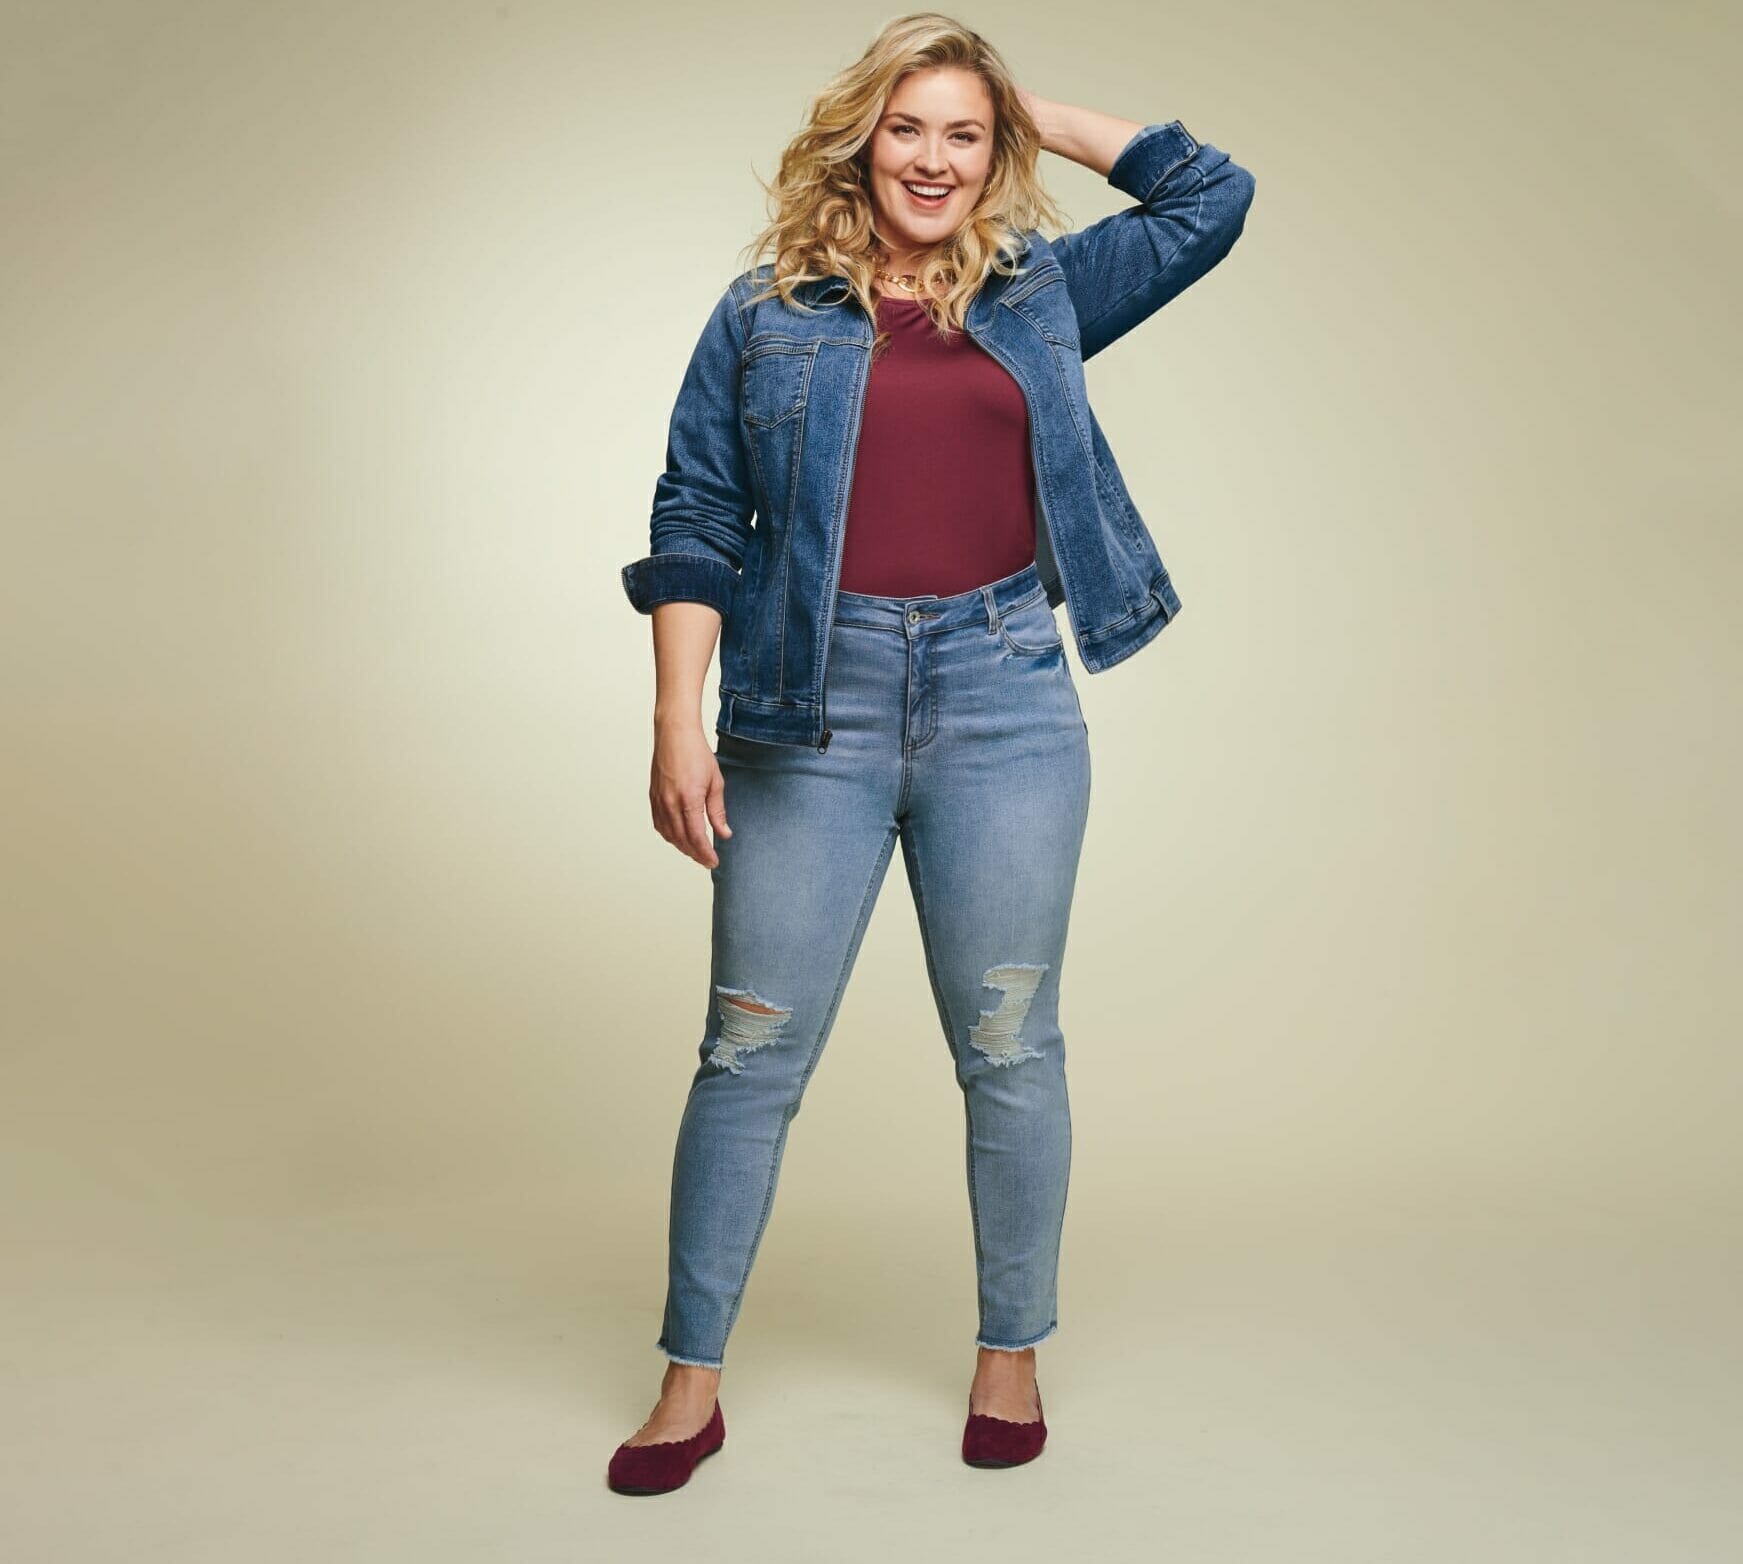 Plus size model wearing denim jeans and jacket